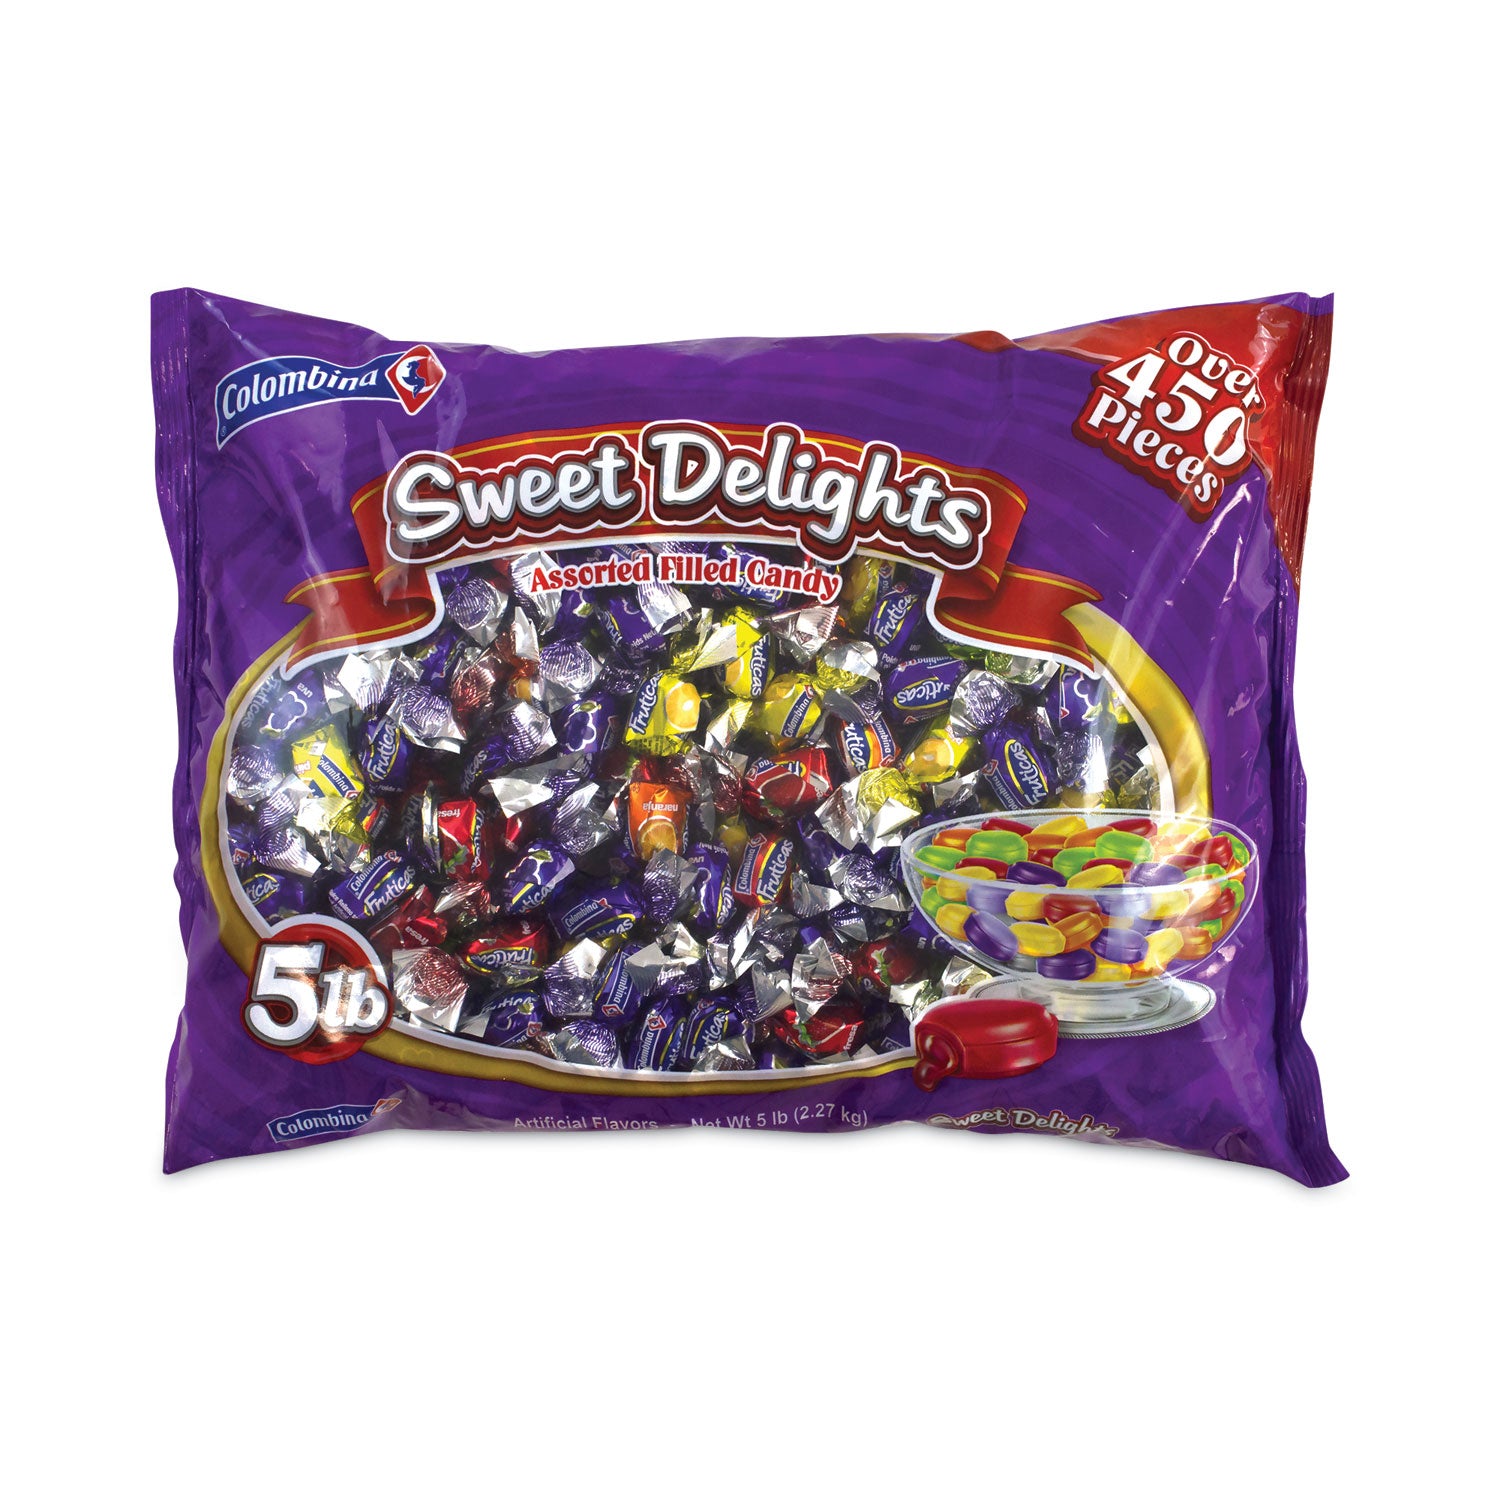 fancy-filled-hard-candy-assortment-variety-5-lb-bag-approx-420-pieces-ships-in-1-3-business-days_grr20900248 - 1